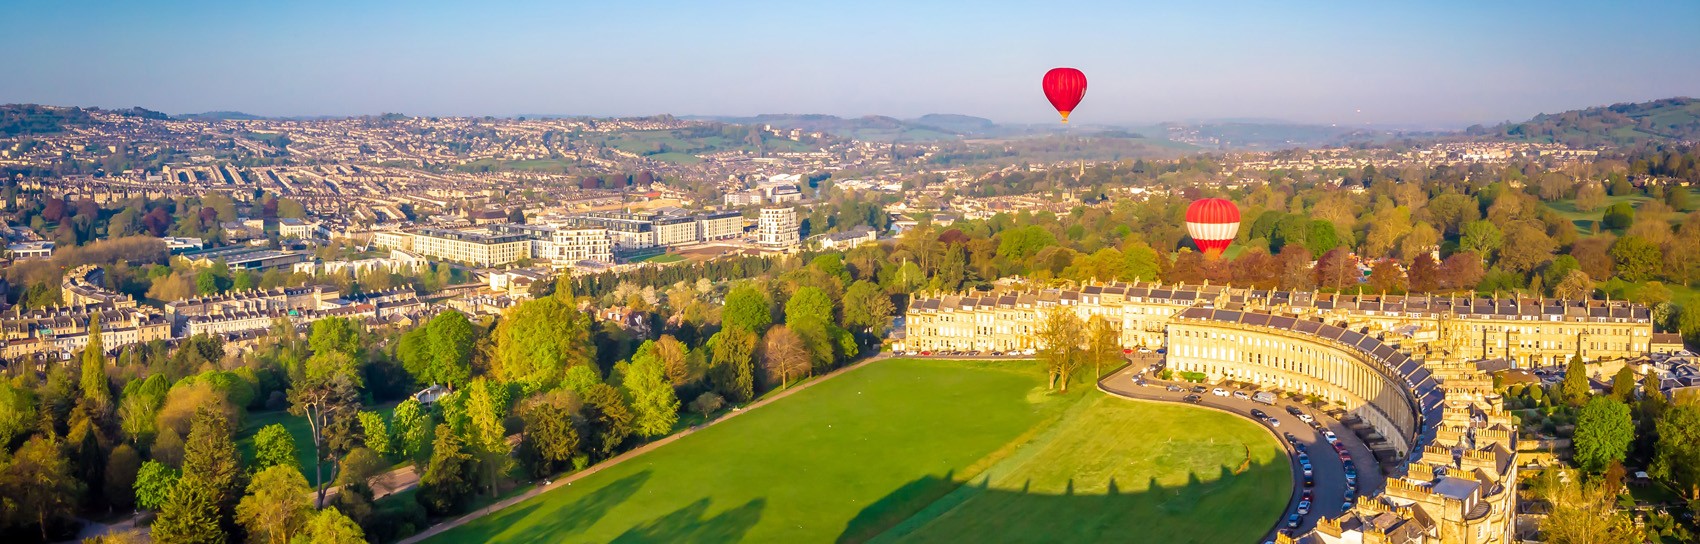 The city of Bath in Somerset. Photograph by ALEXEY FEDORENKO